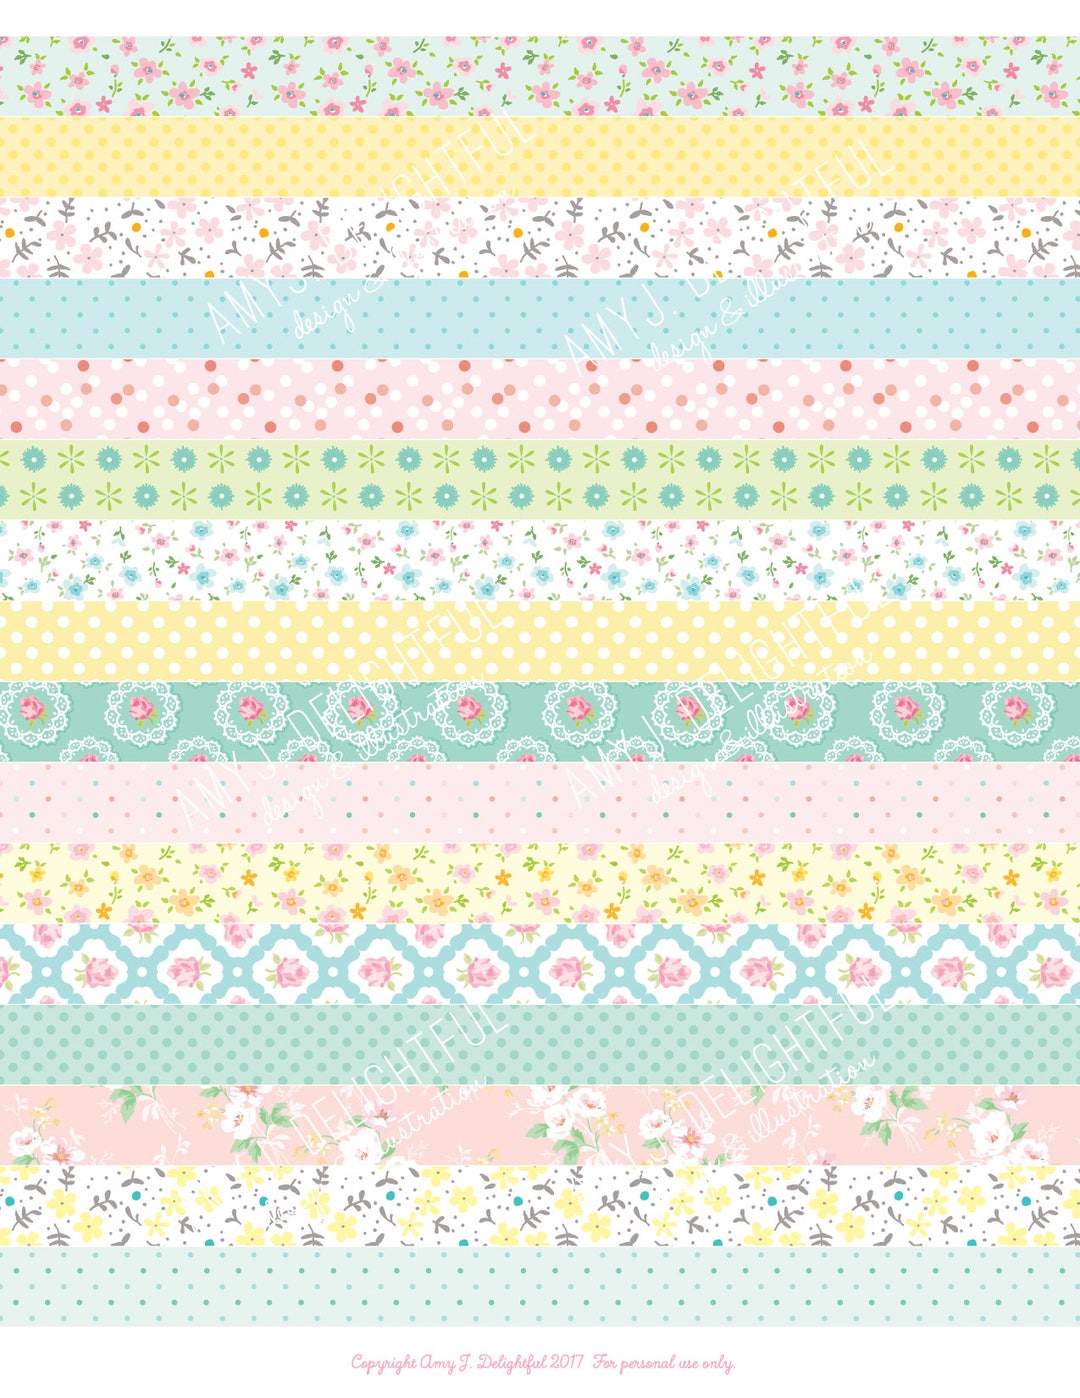 Shine Printable Washi Tape & Labels - For Faith-Based Art Journal, Bib –  Pink Paper Peppermints